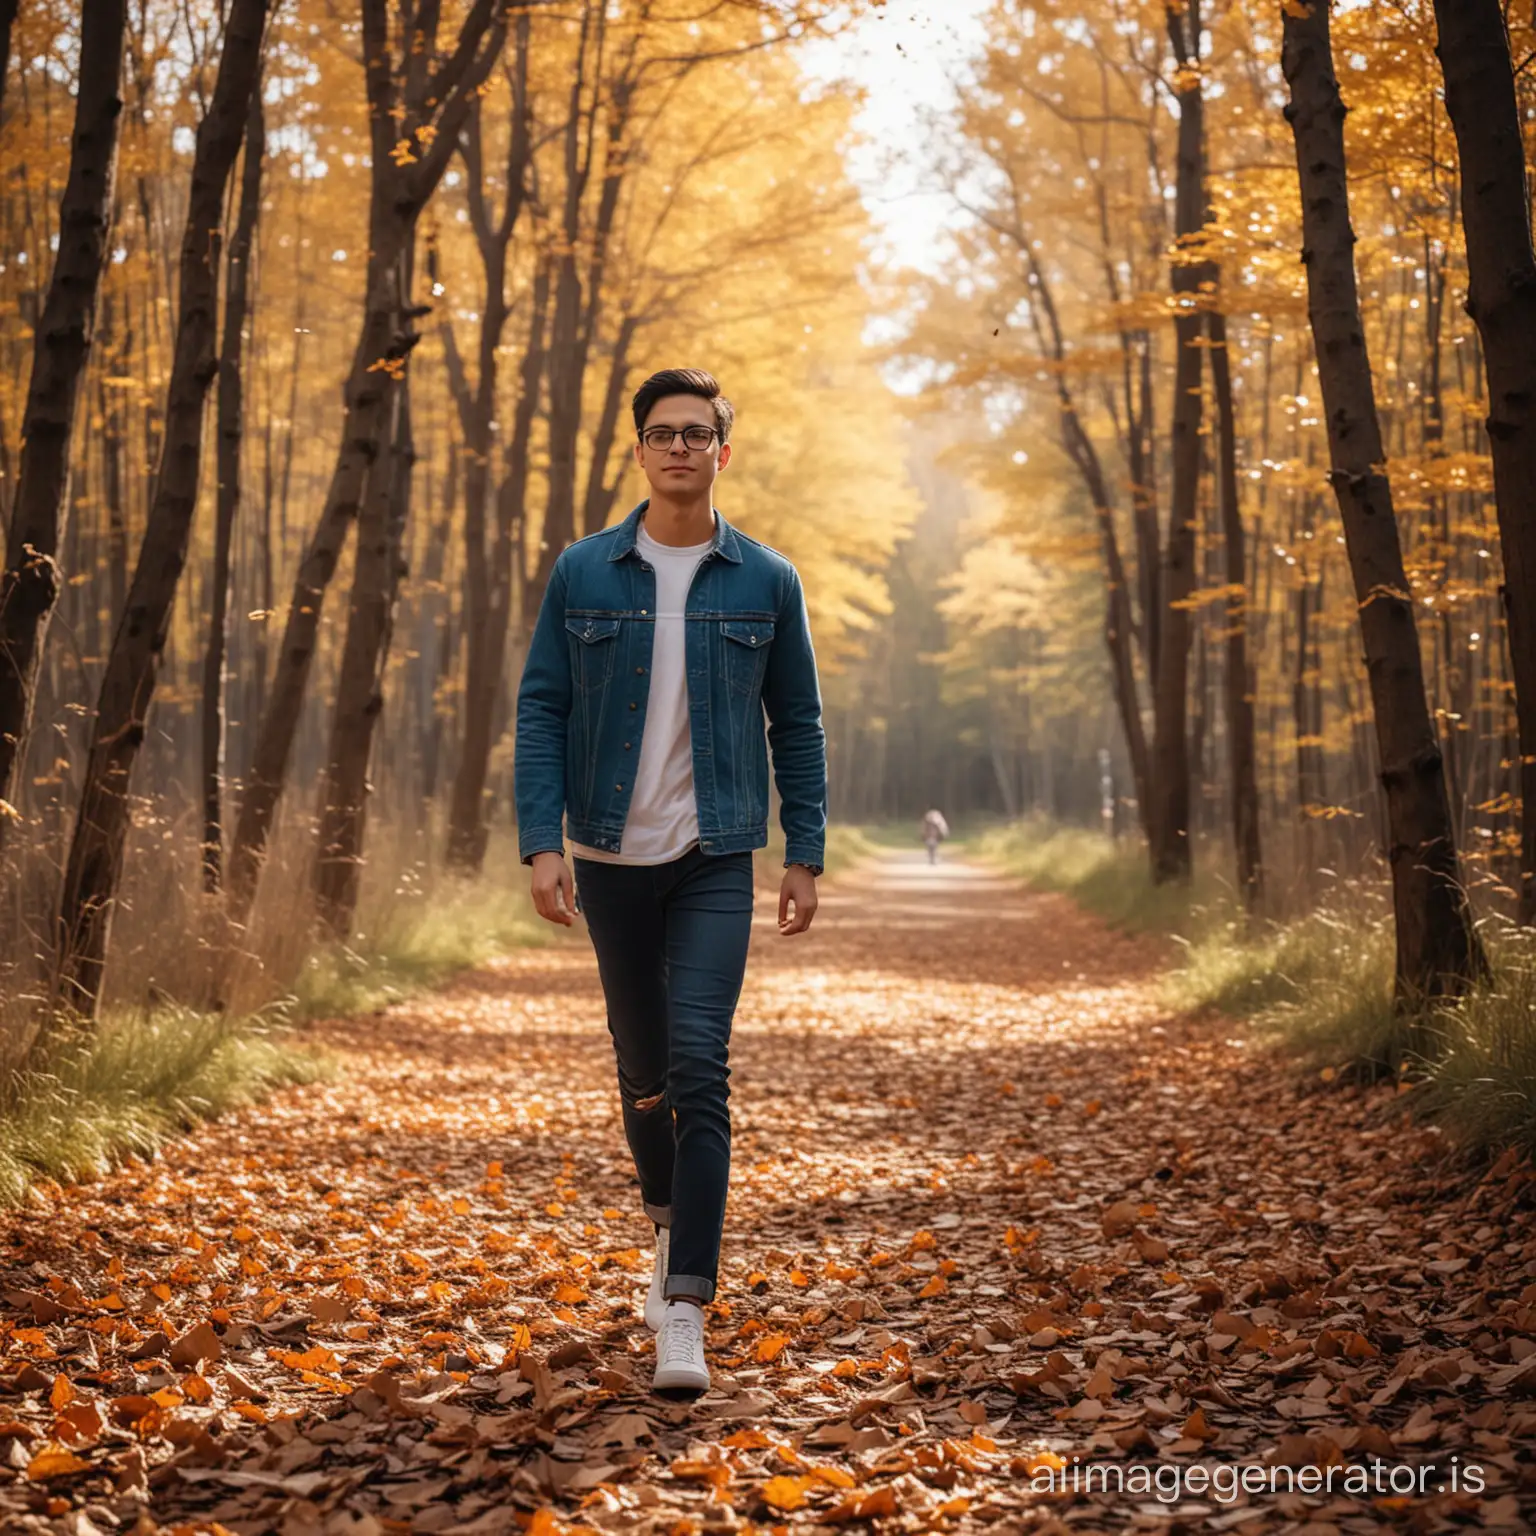 (highres,realistic:1.2), full body shoot, wide shoot, cinematic portrait of handsome 20 years old man, glasses, with very short cut black hair, wearing denim jeans and white sneakers Tommy Hilfiger shoes, walking in the forest, dry elk leaves floating in the air, autumn scenery, peaceful atmosphere, warm sunlight, serene expression, joy, playful mood, golden leaves, orange and brown tones, gentle breeze, falling leaves, natural surroundings, soft grass, relaxed pose, scattered leaves around, crisp sound of leaves, vibrant colors, rustic setting, nature's beauty, quiet moment, outdoor activity, carefree youth, leafy ground, motion blur for leaves, wide-angle perspective, tranquil ambiance, childlike wonder, nostalgic feeling, enchanting scenery